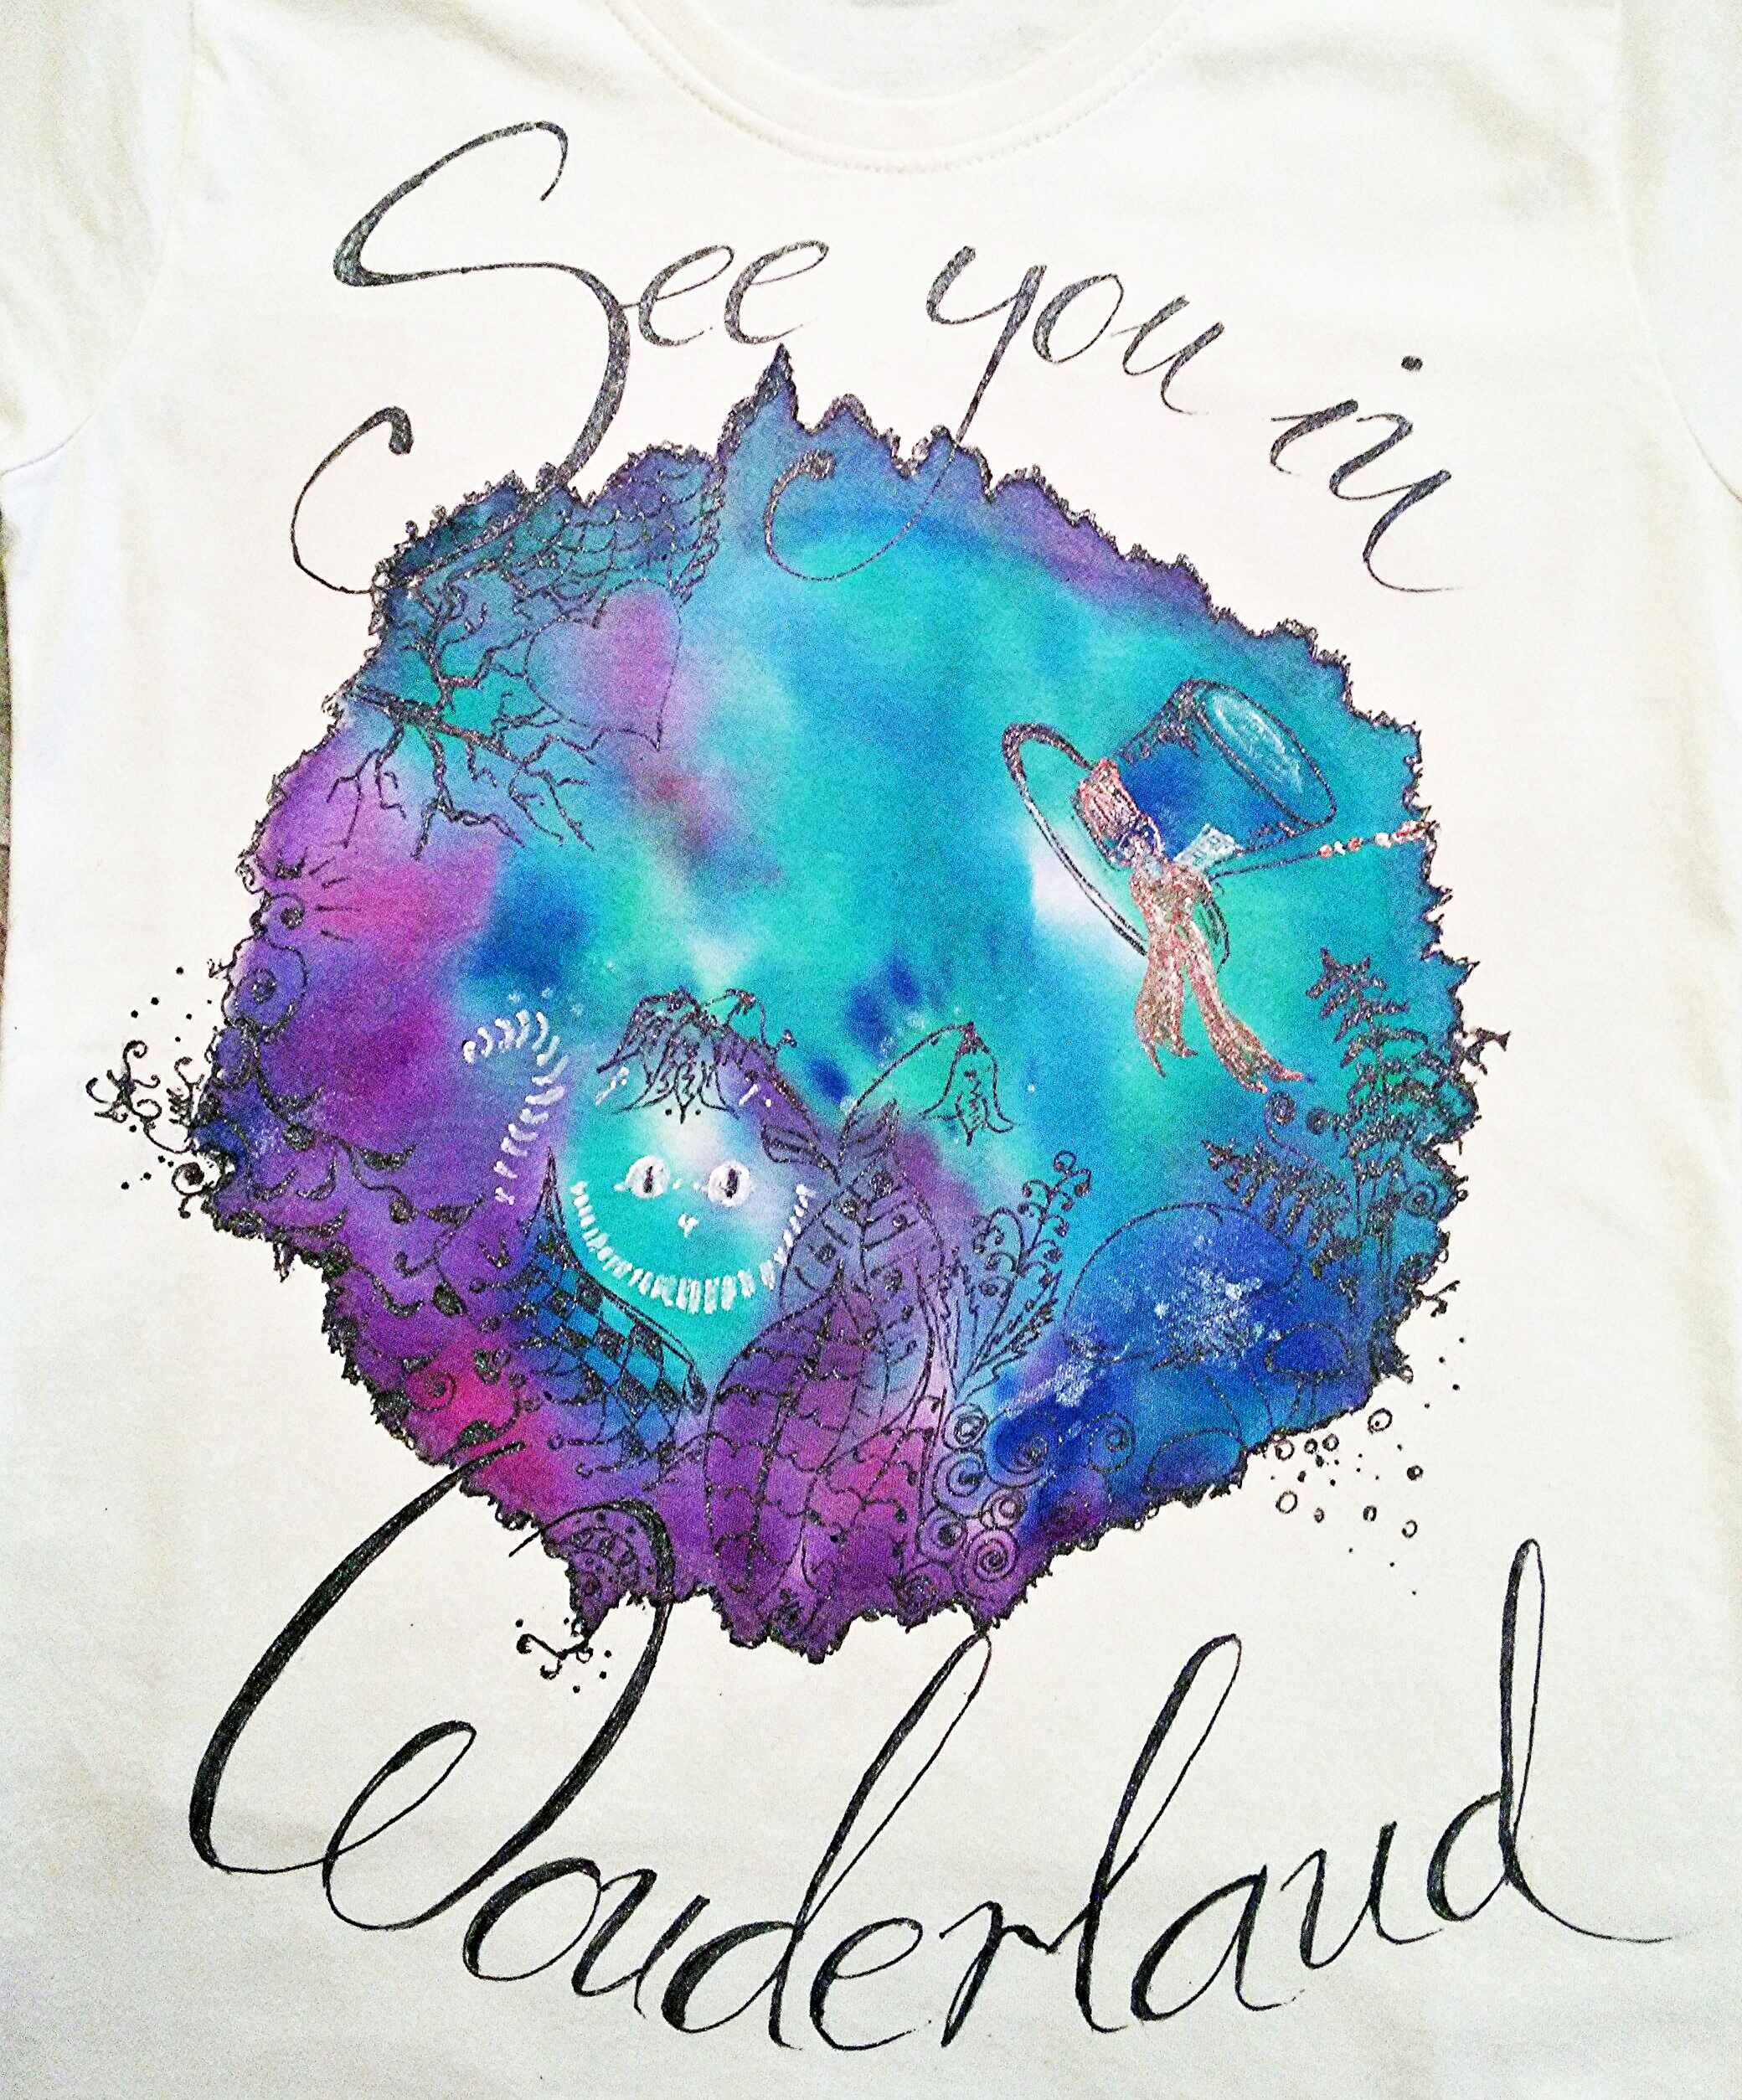 T-Shirt "See you in Wonderland